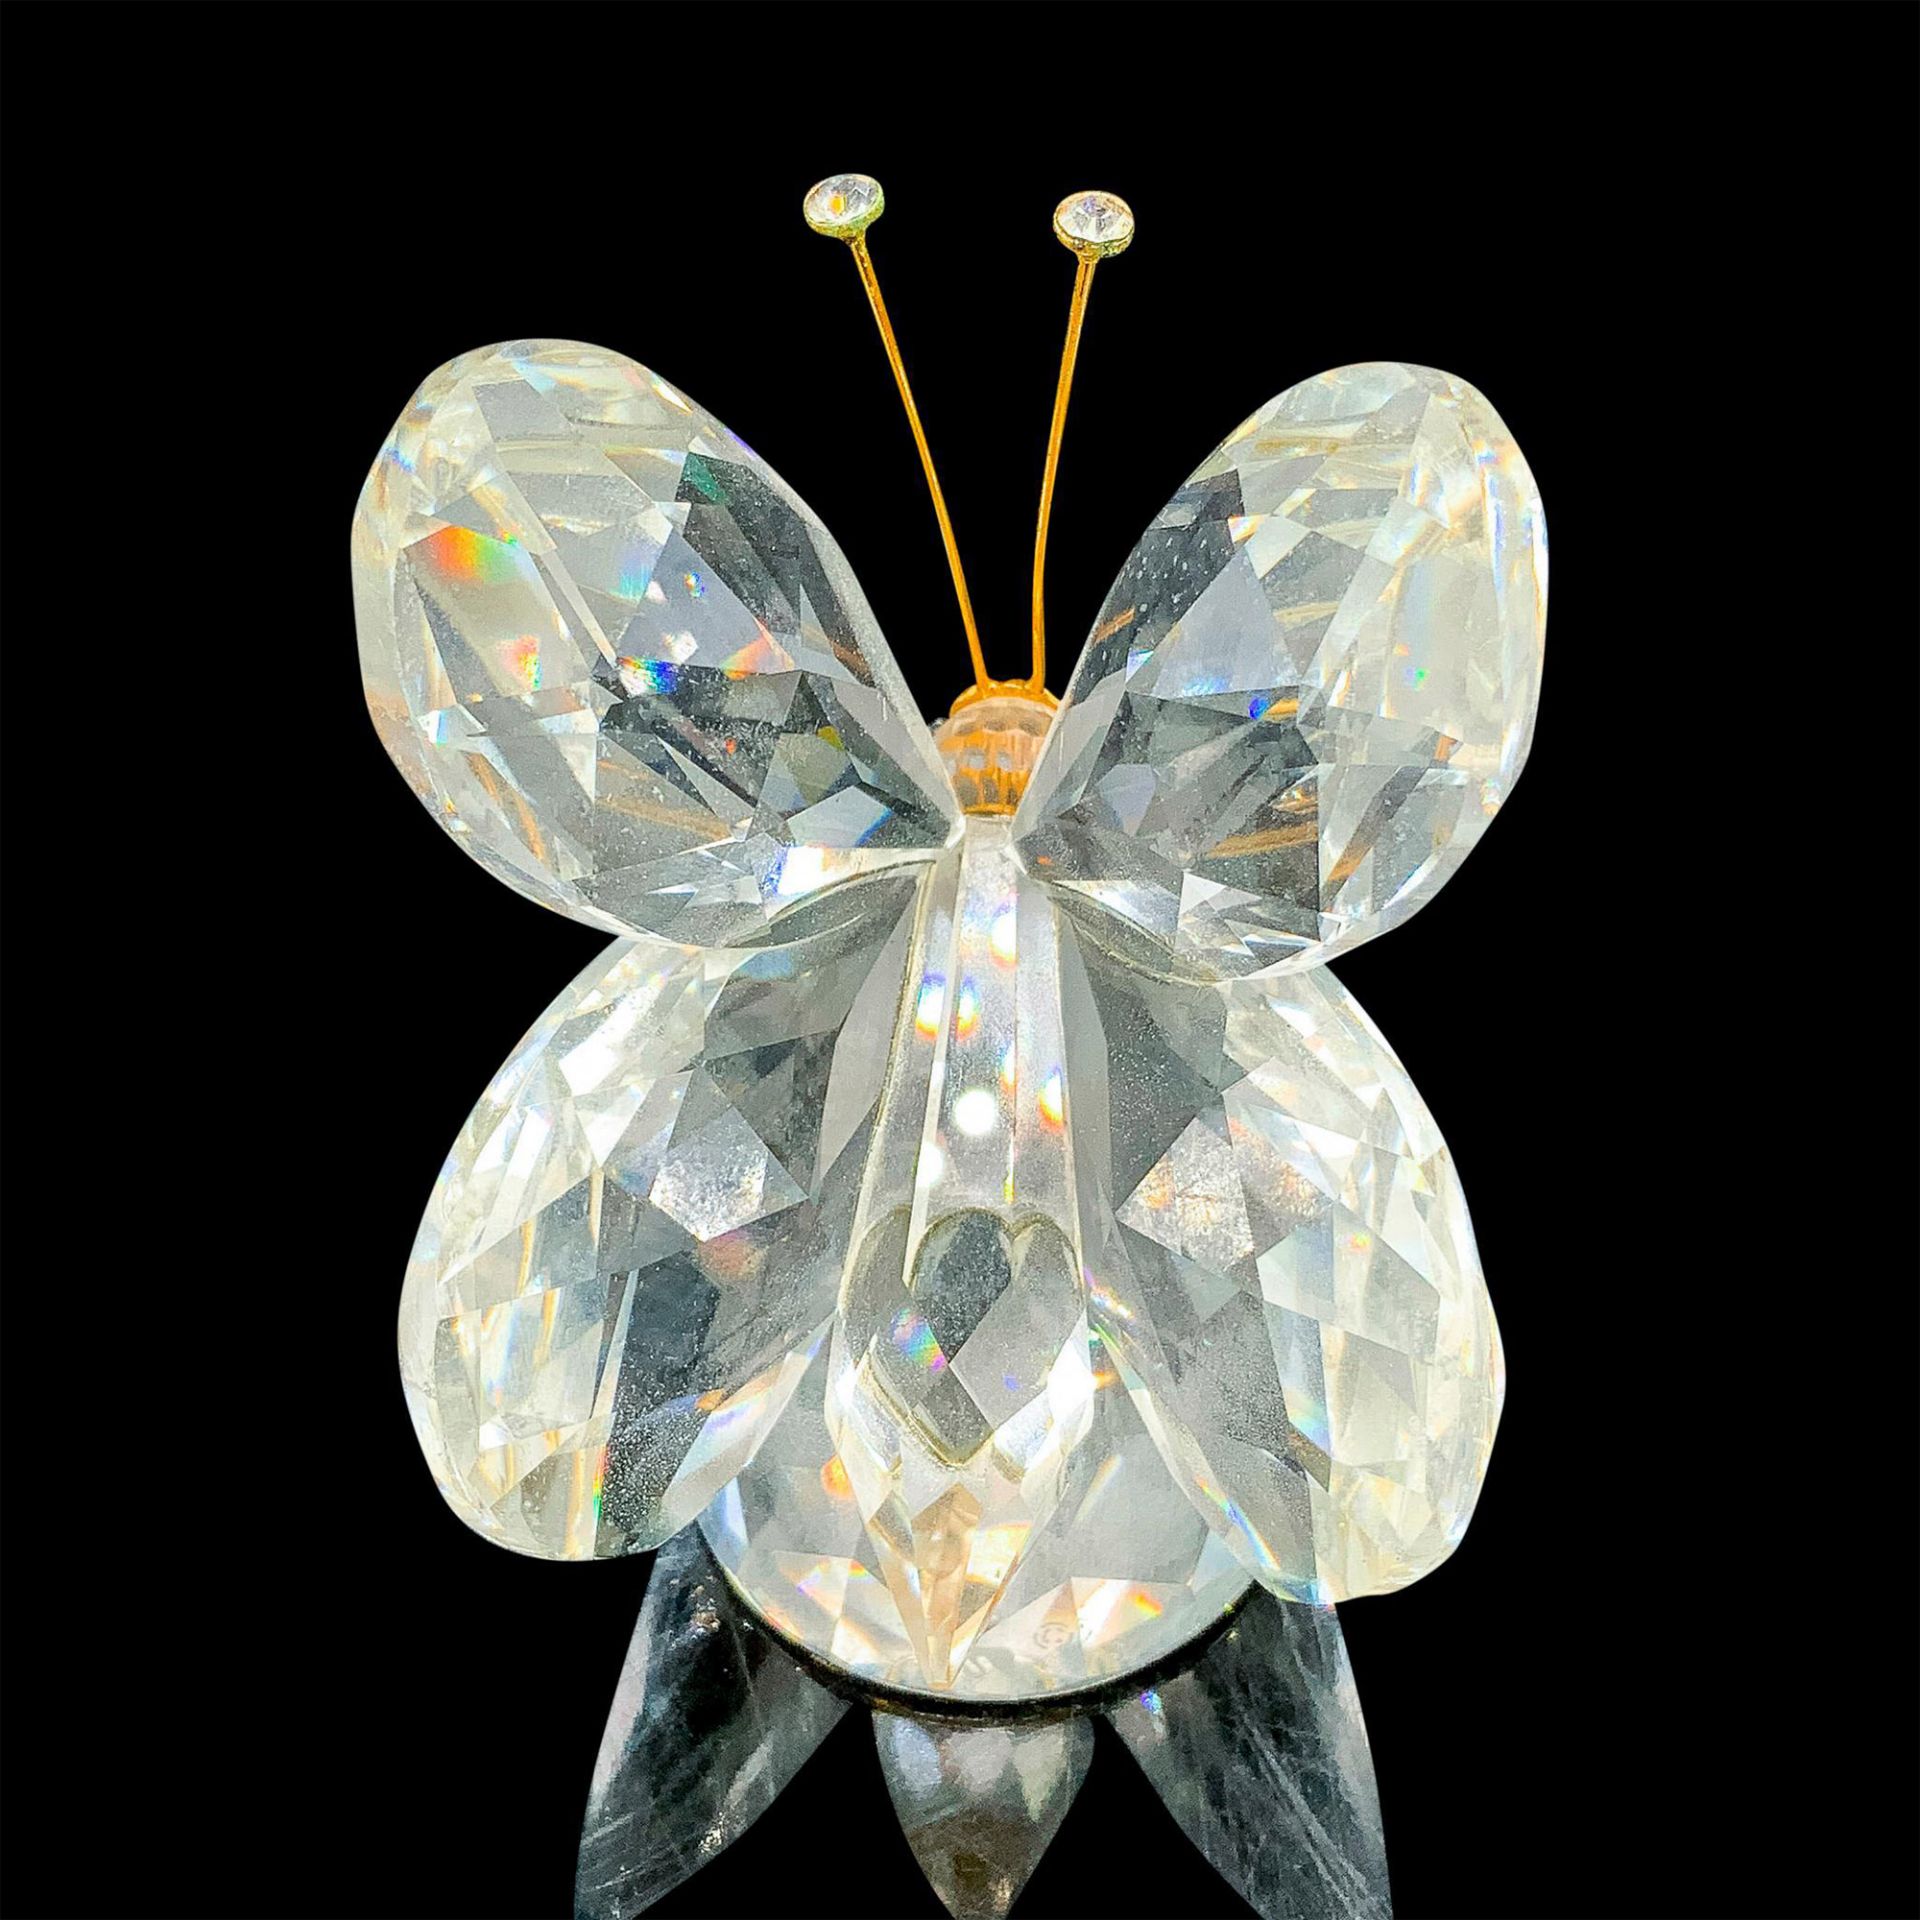 Swarovski Crystal Figurine, Butterfly with Gold Antennae - Image 2 of 3